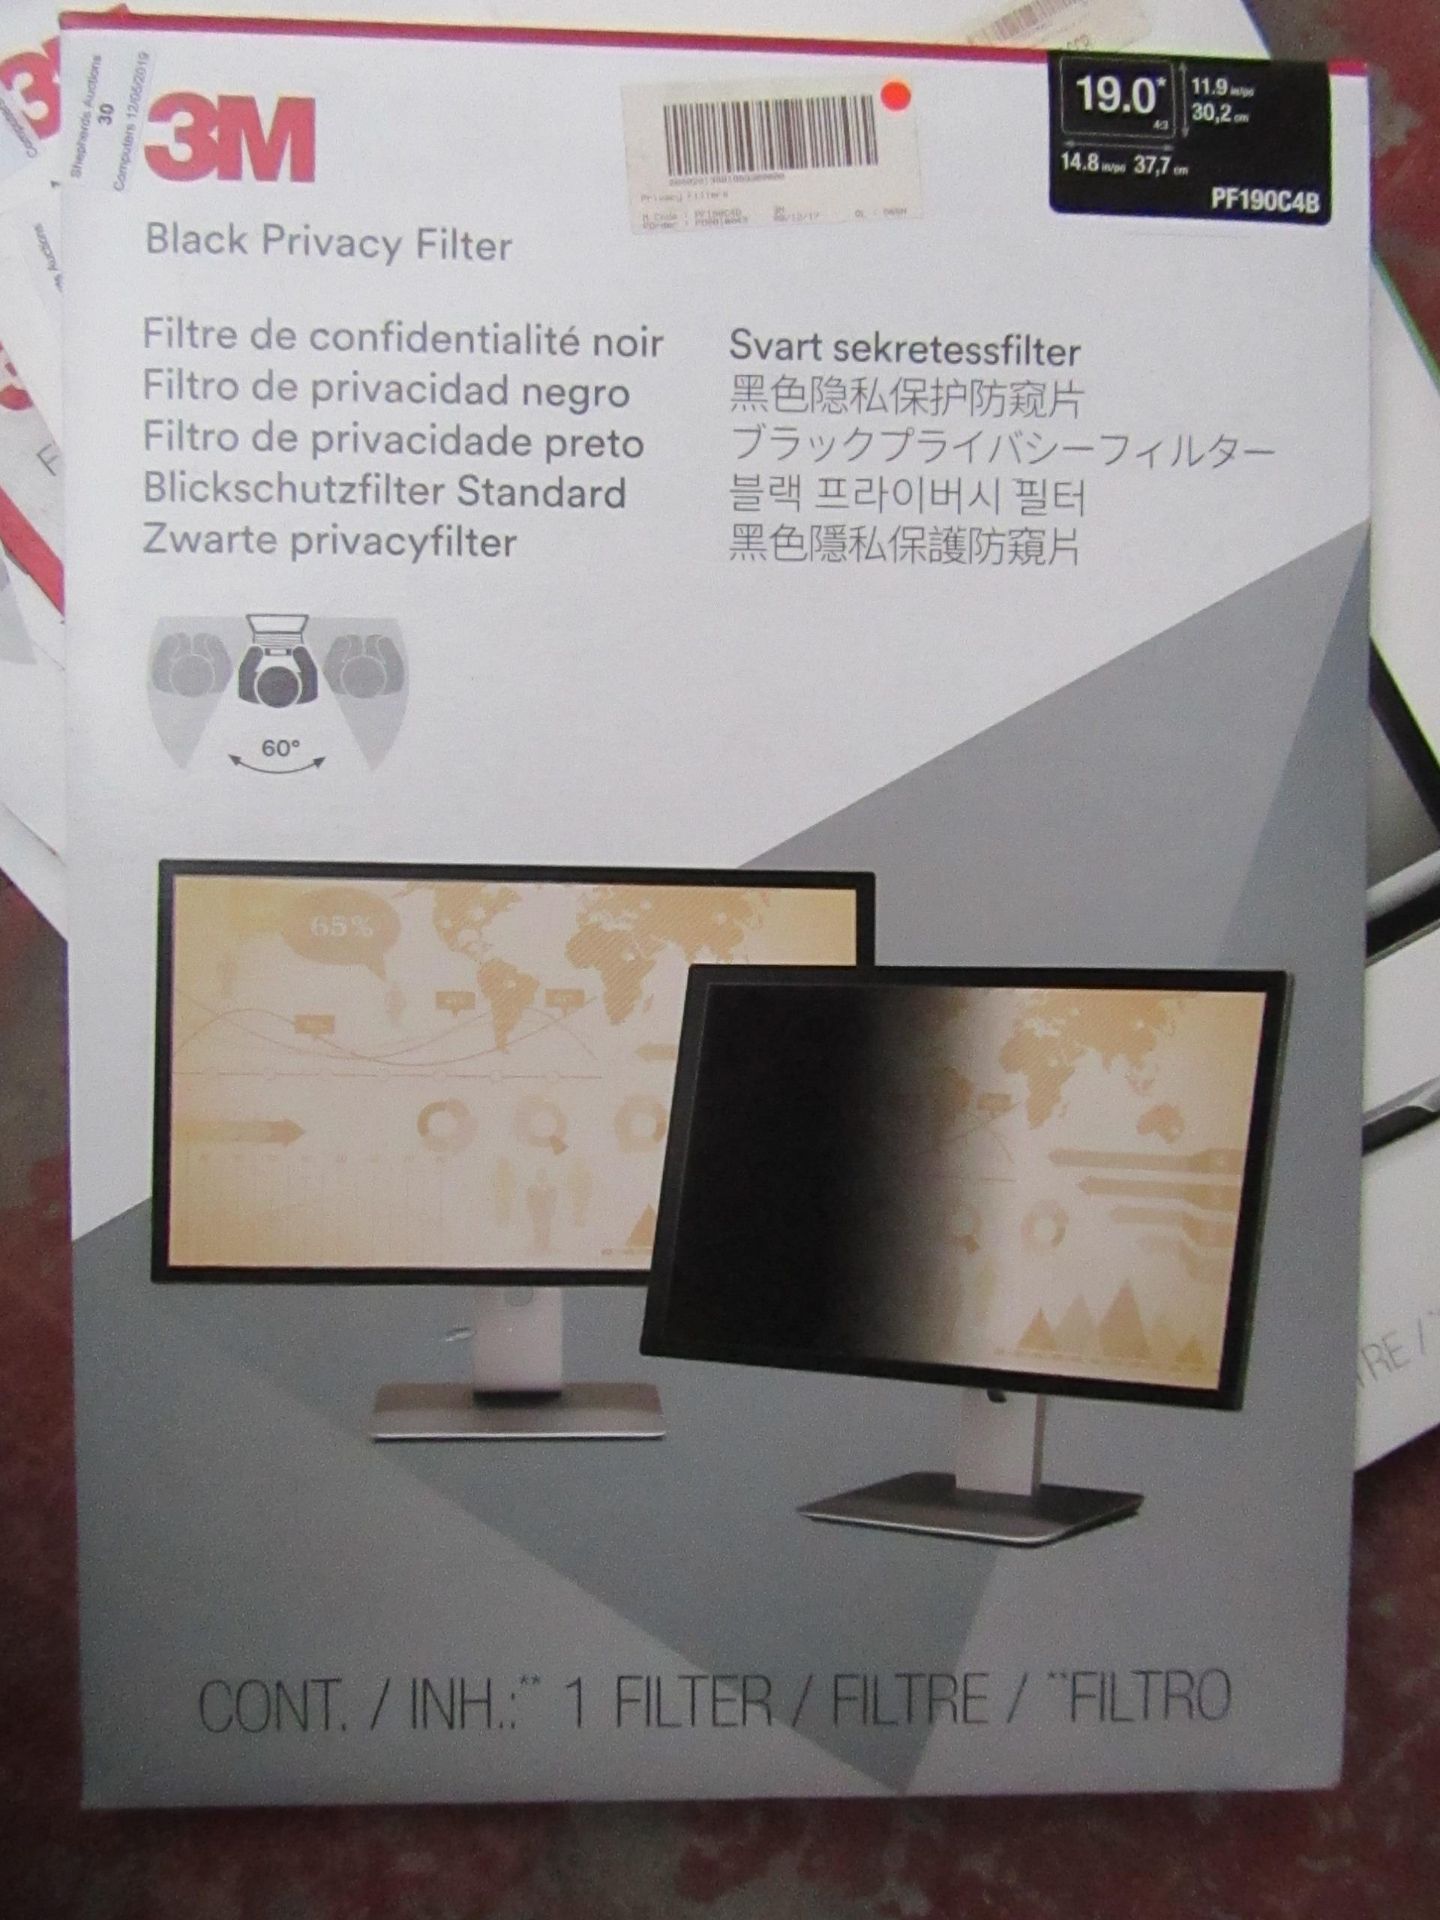 3M privacy Filter 19.00" Screen Size, Grade B (refer to Lot 0 for condition) and boxed RRP £40.00